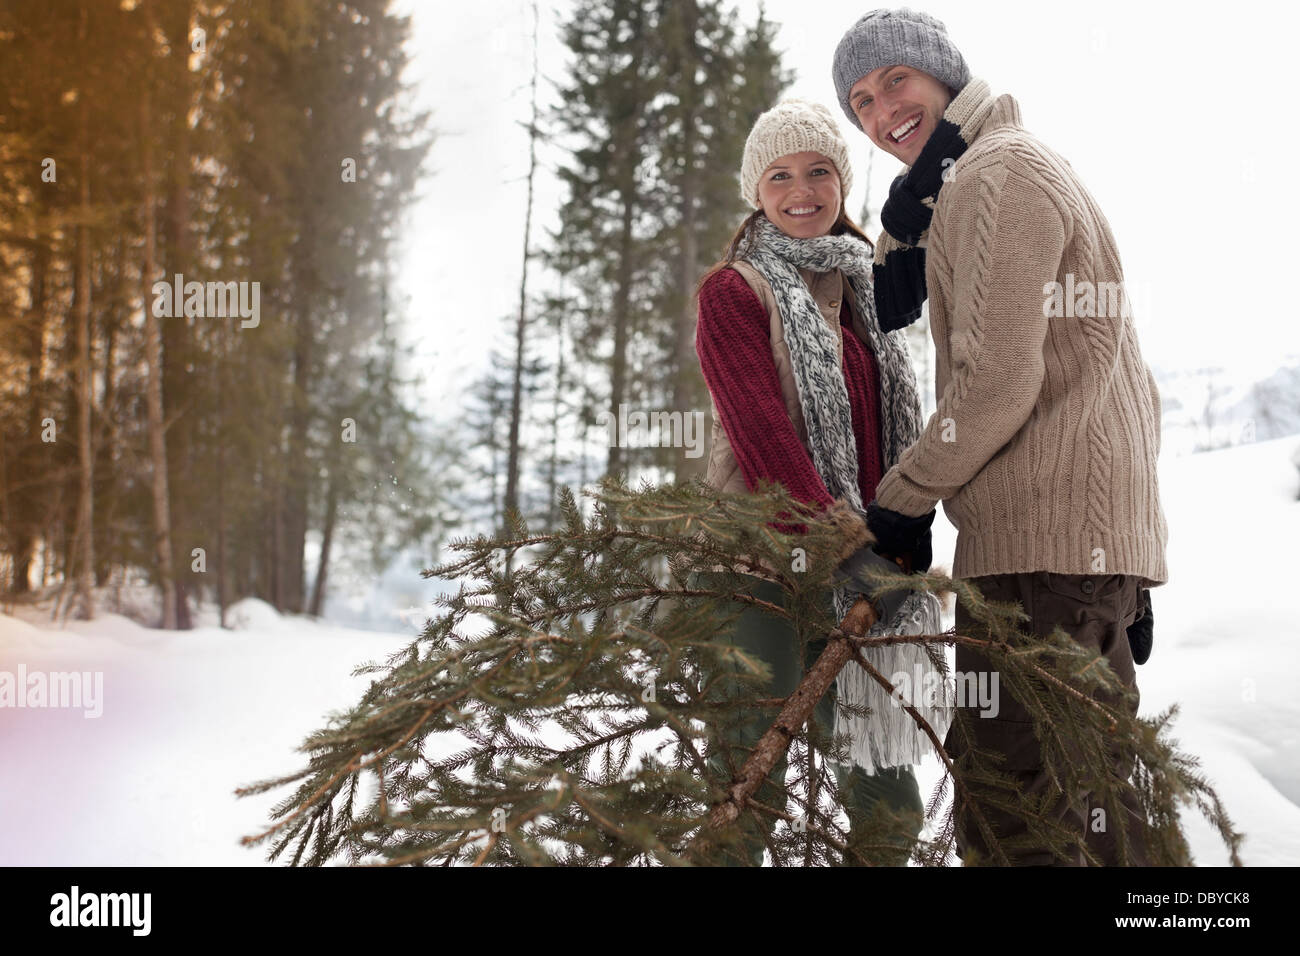 Portrait of happy couple with fresh Christmas tree in snowy woods Stock Photo